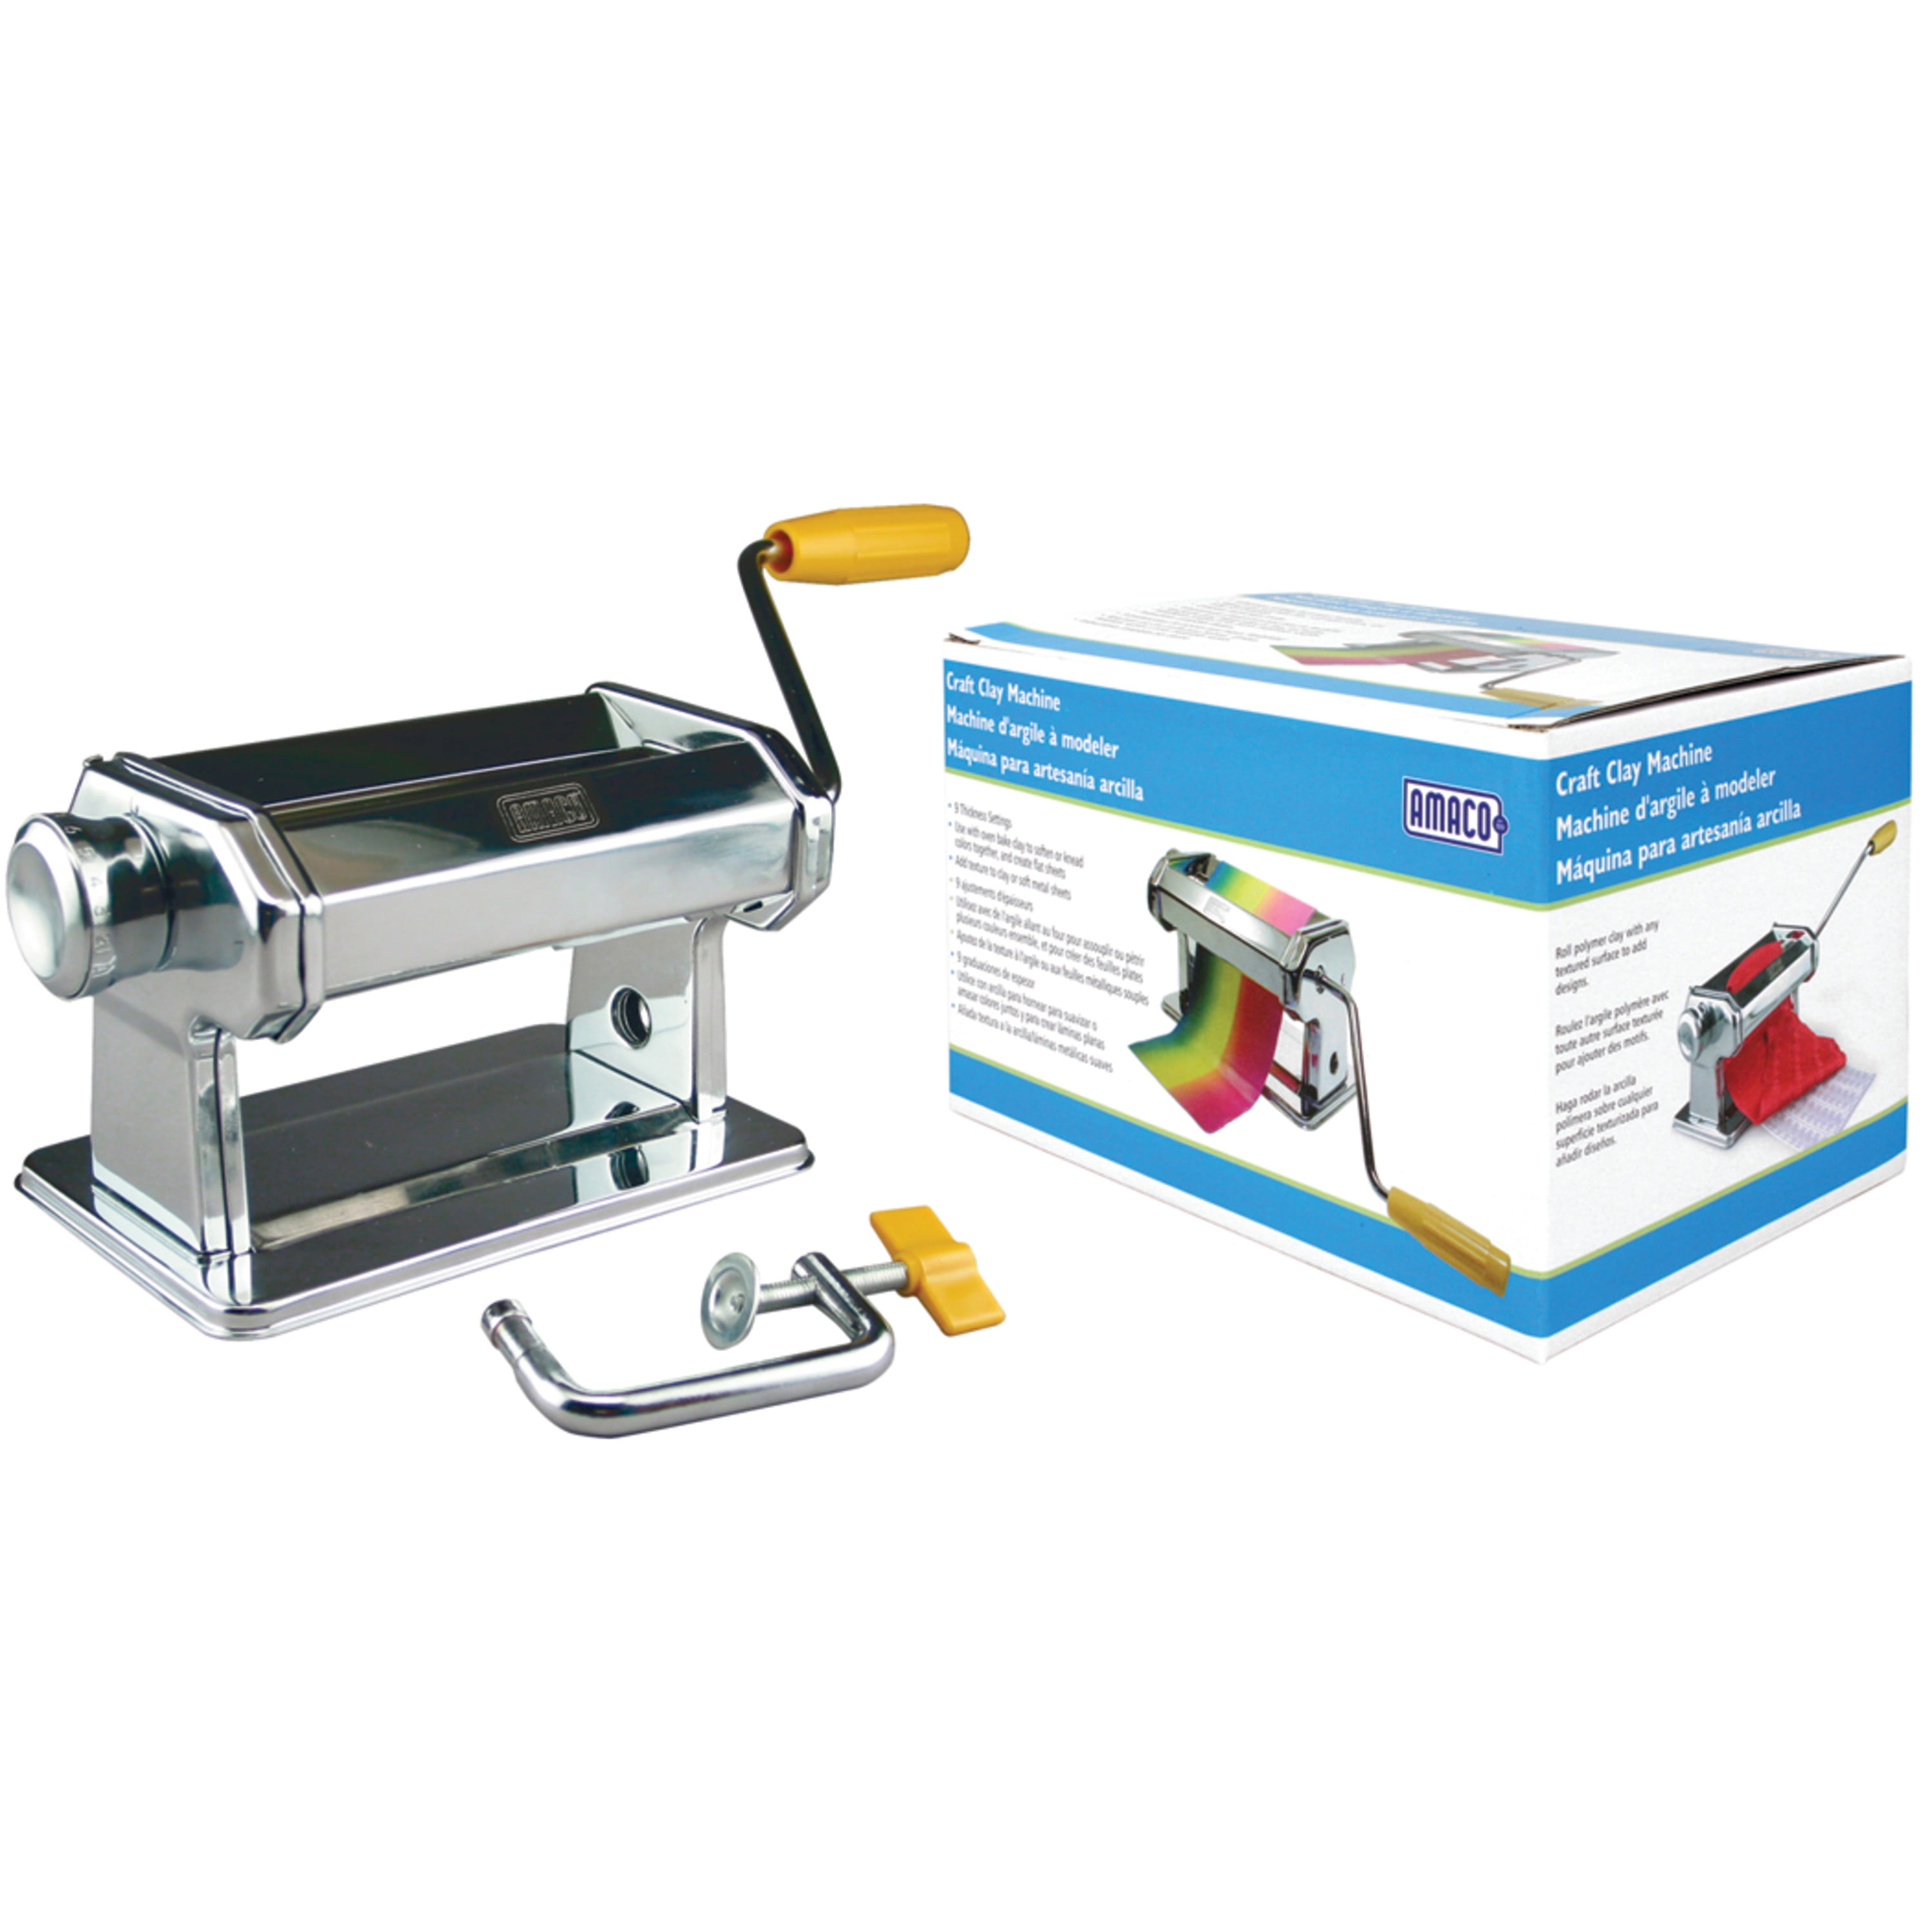 Amaco Pasta Machine to Use With Polymer Clays and Soft Metal